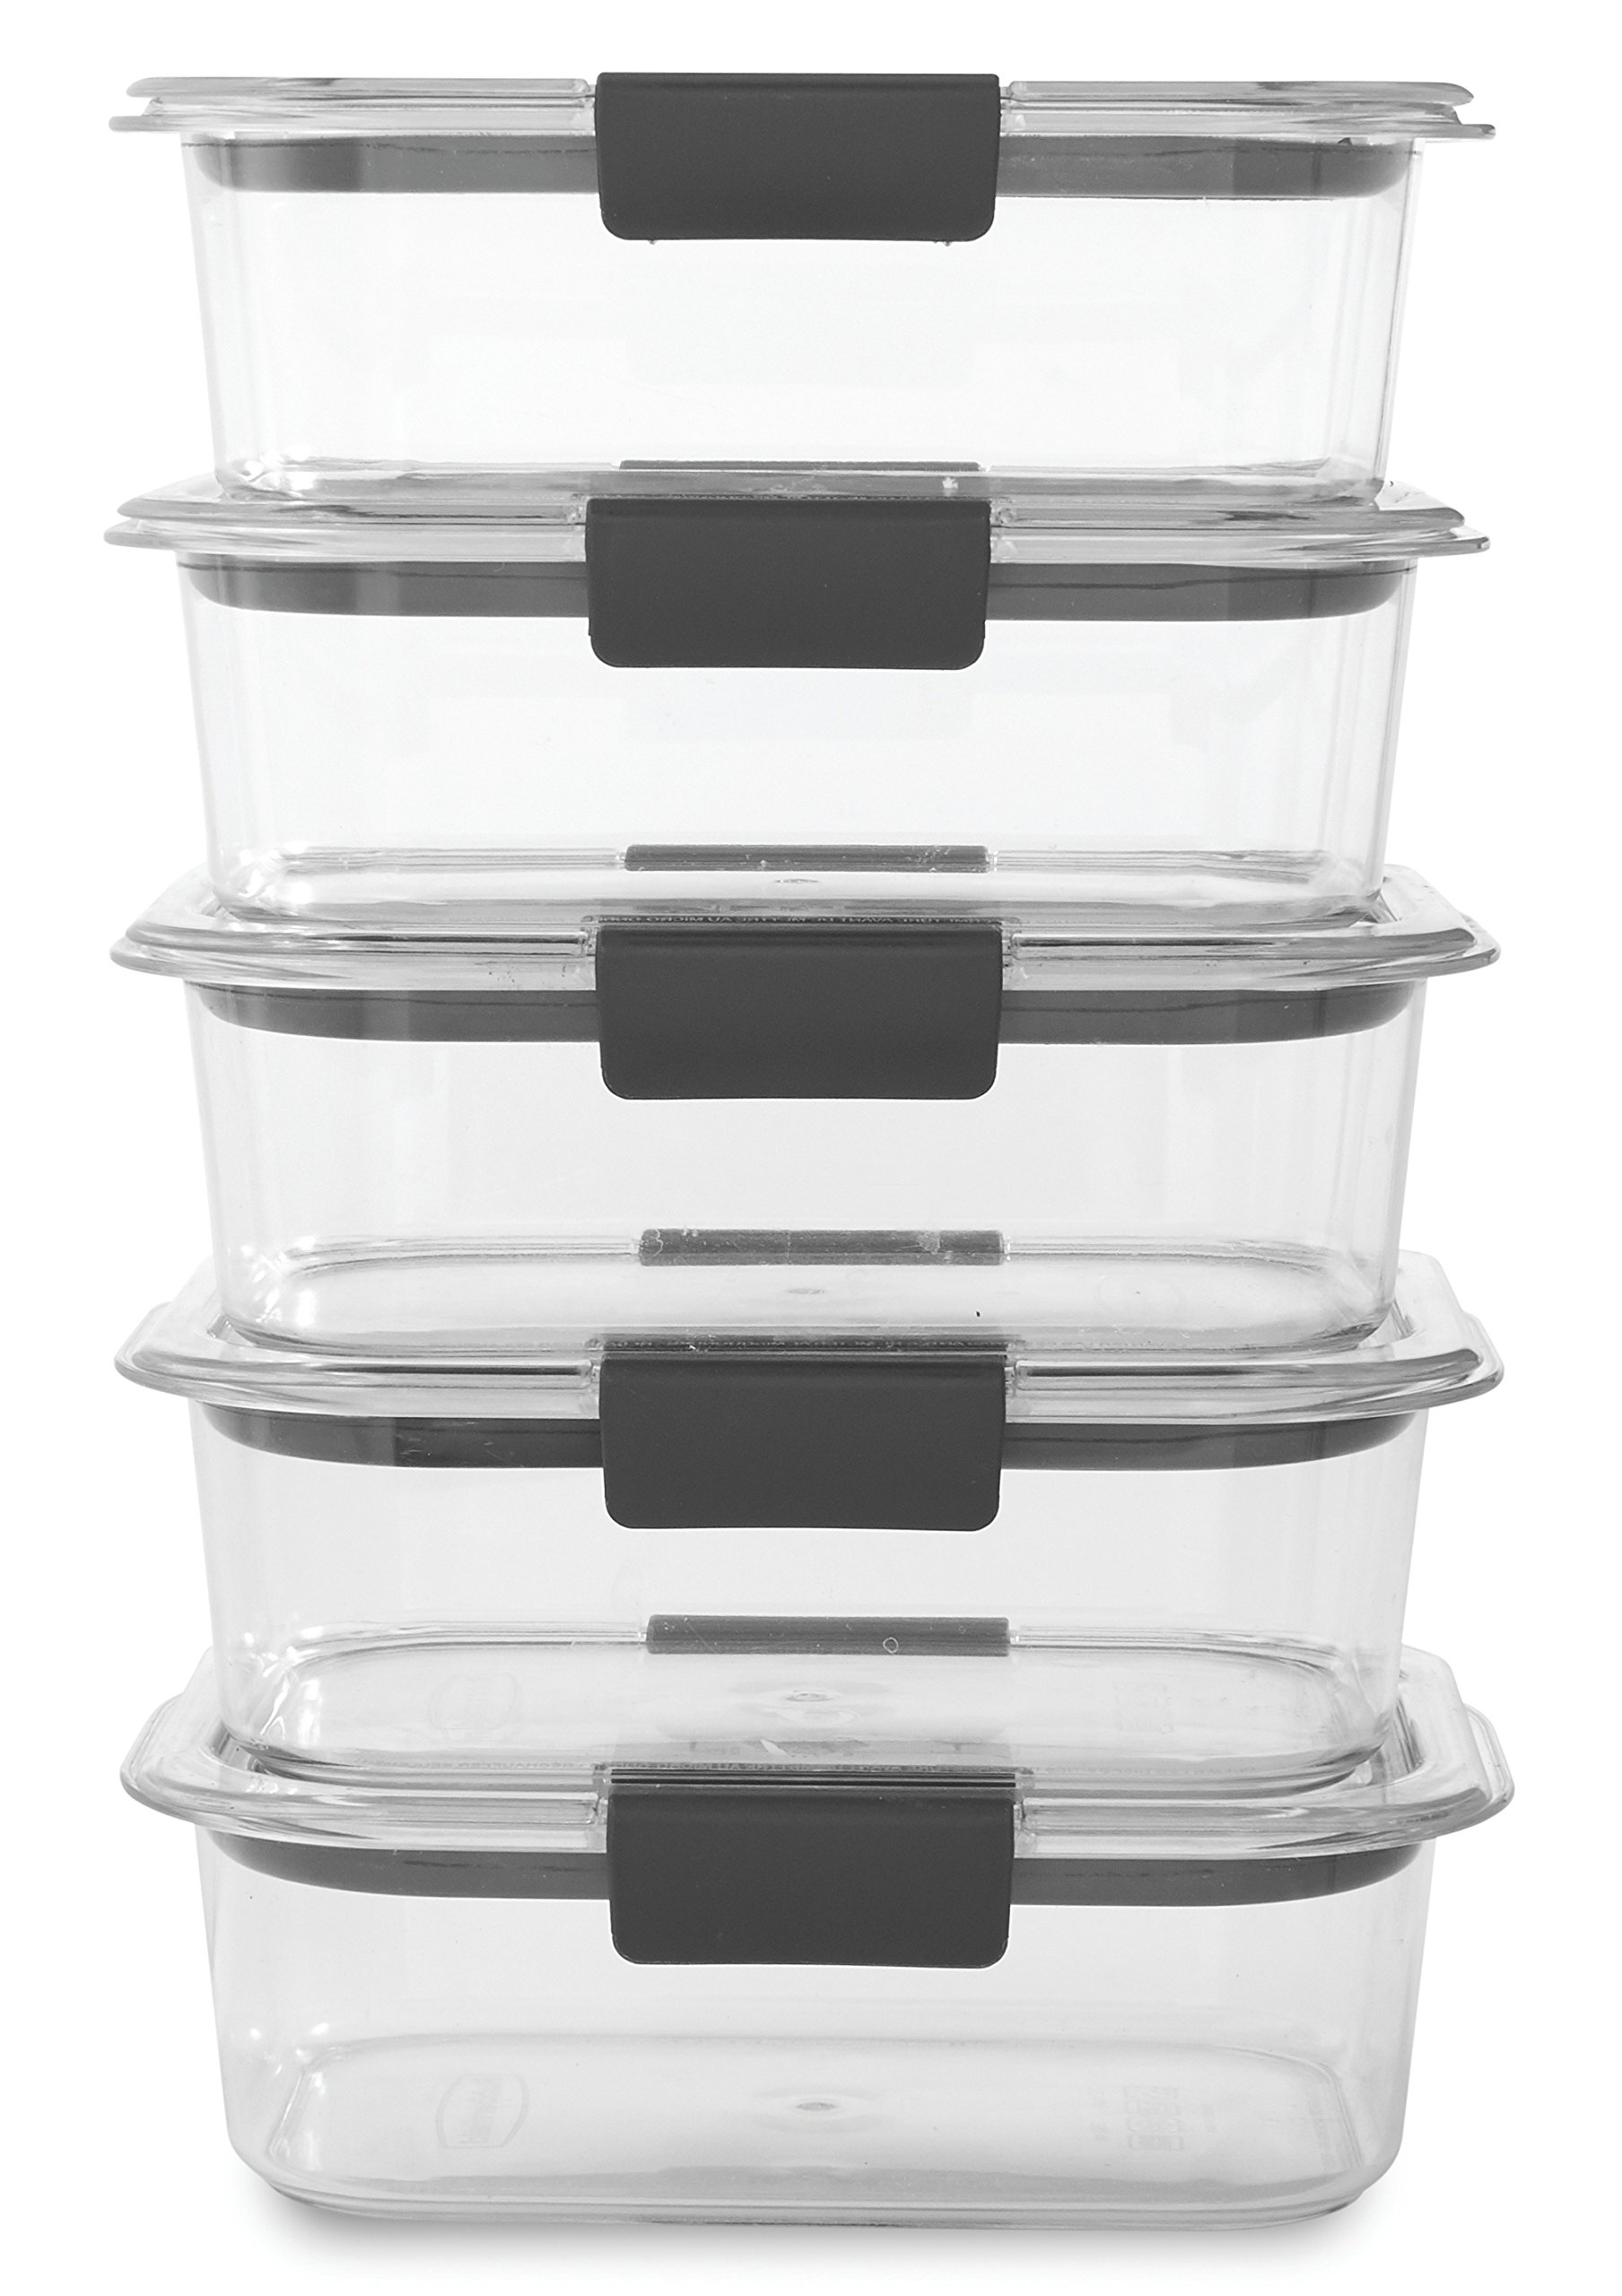 Rubbermaid Brilliance BPA Free Food Storage Containers with Lids, Airtight, for Lunch, Meal Prep, and Leftovers, Set of 5 (3.2 Cup)